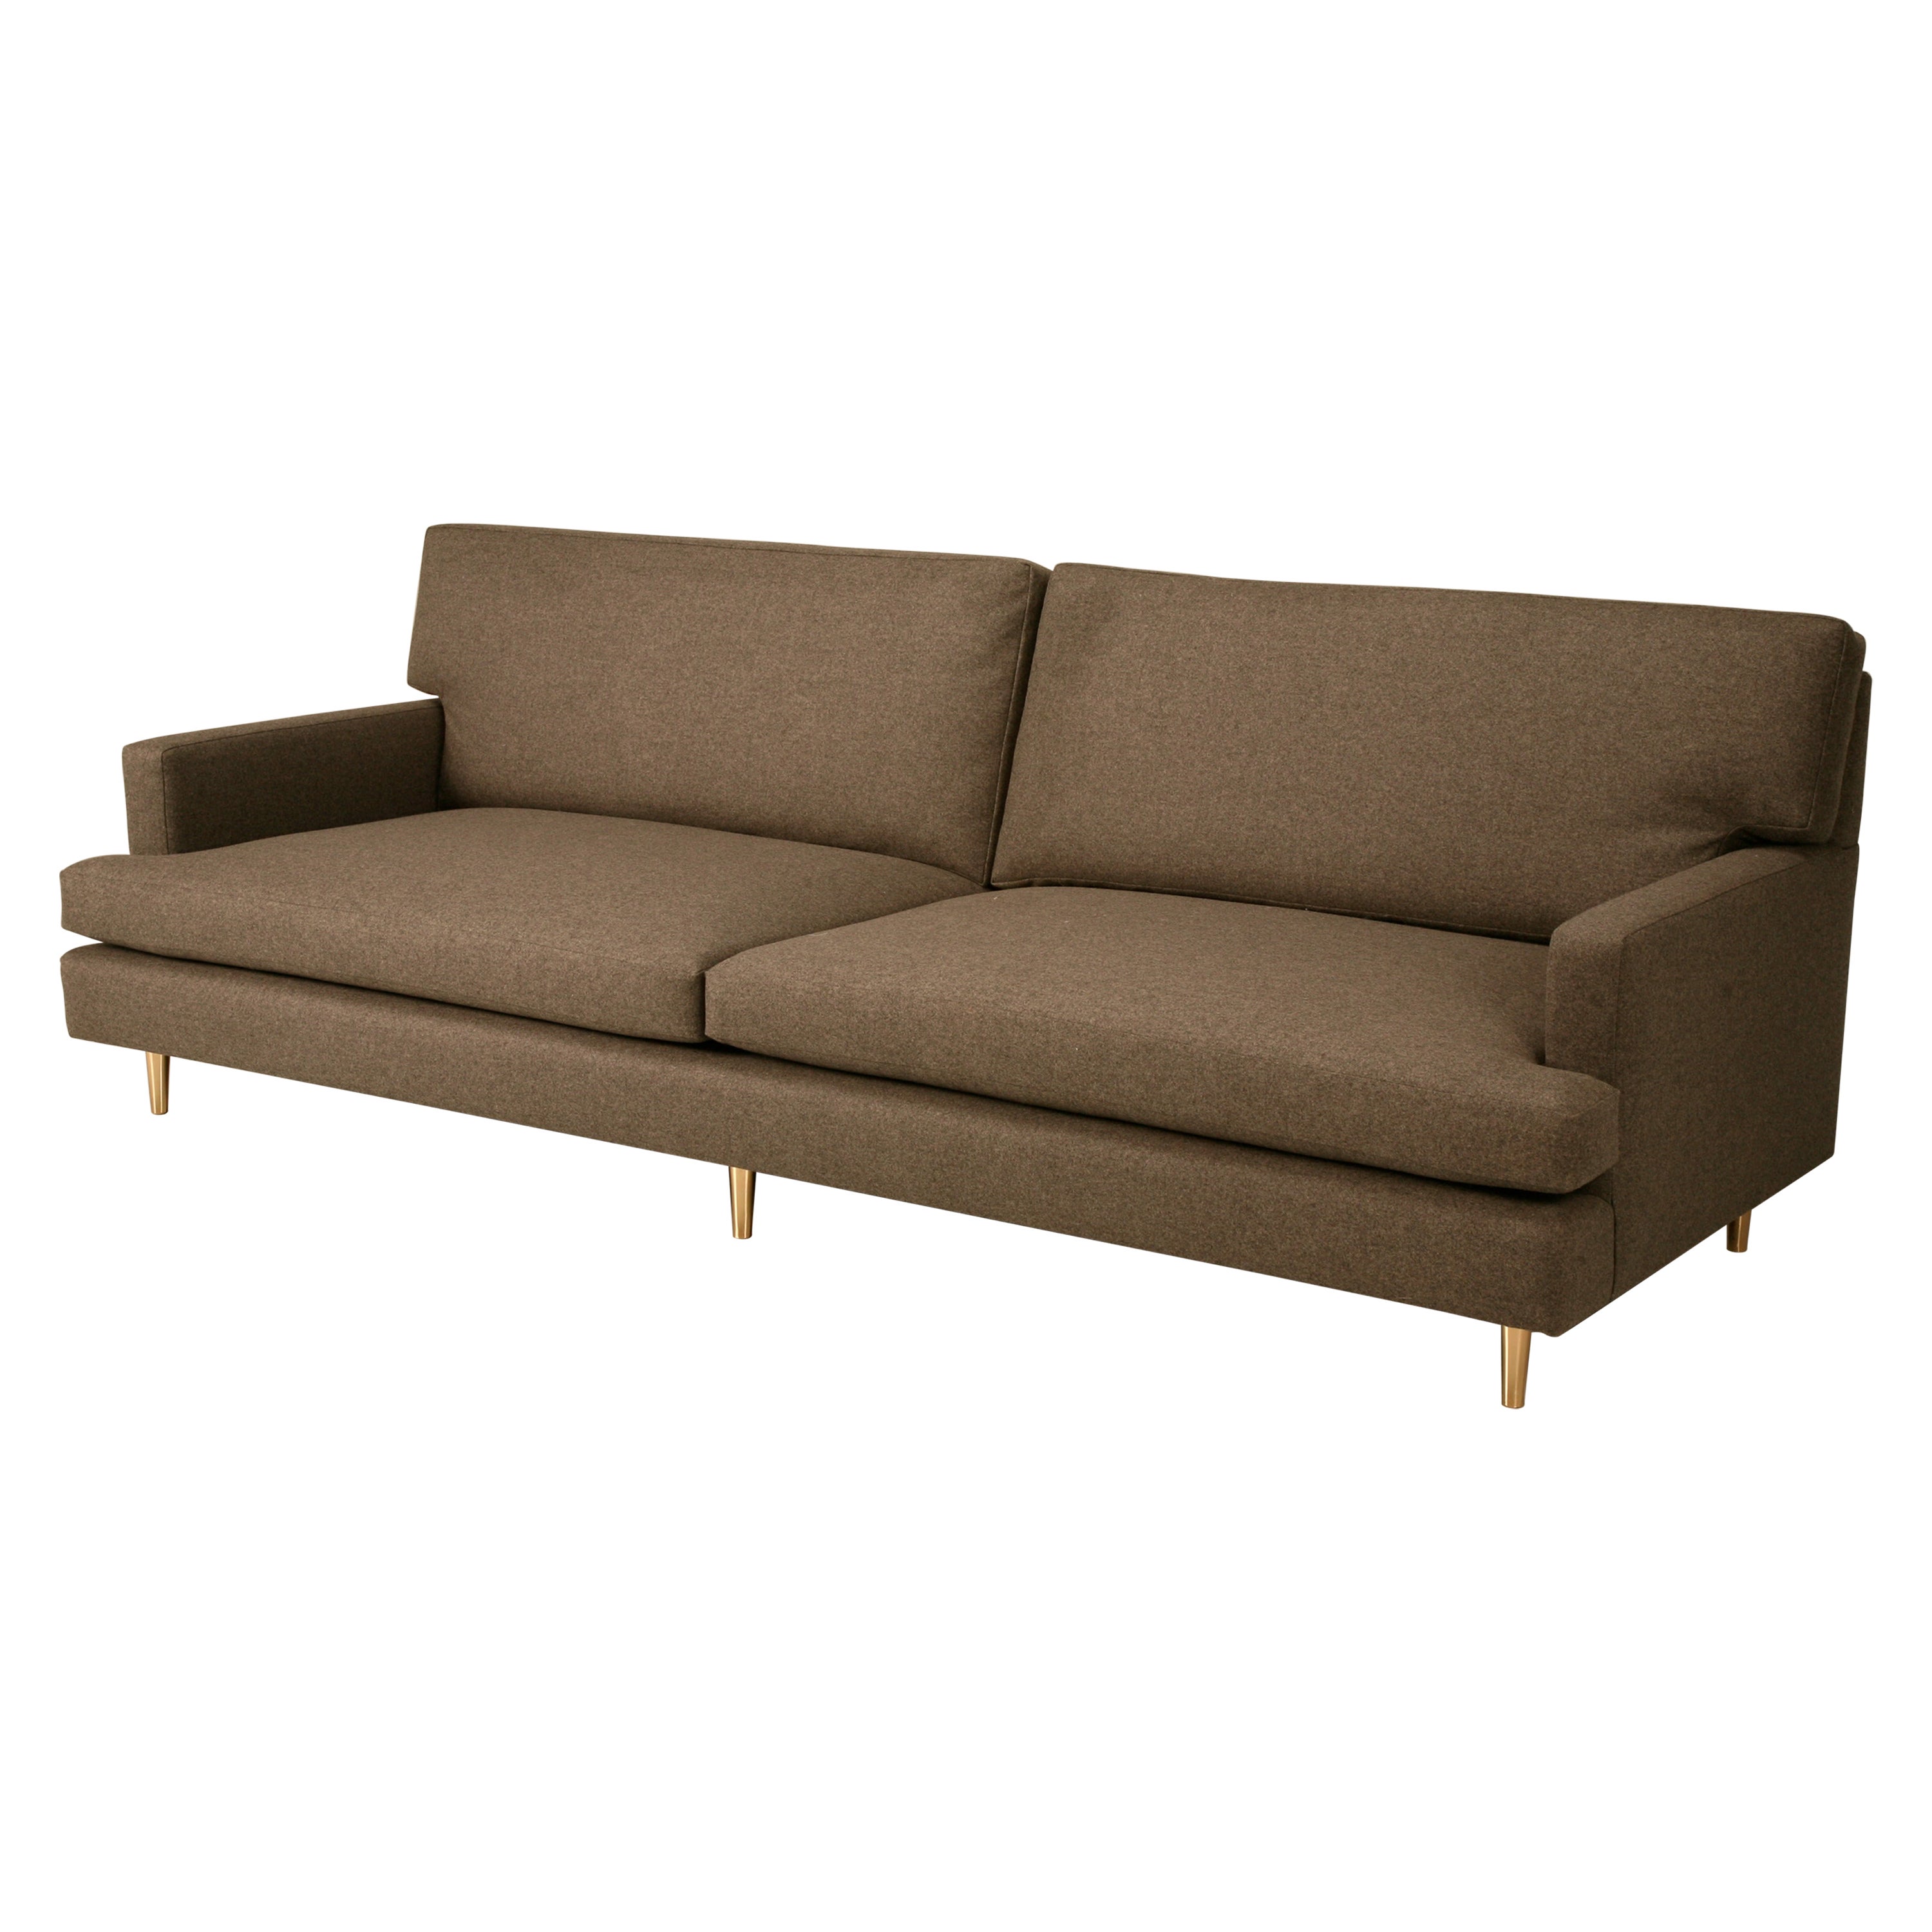 Sofa Hand-Made in Chicago in Any Dimension with Brass Feet Priced Without Fabric